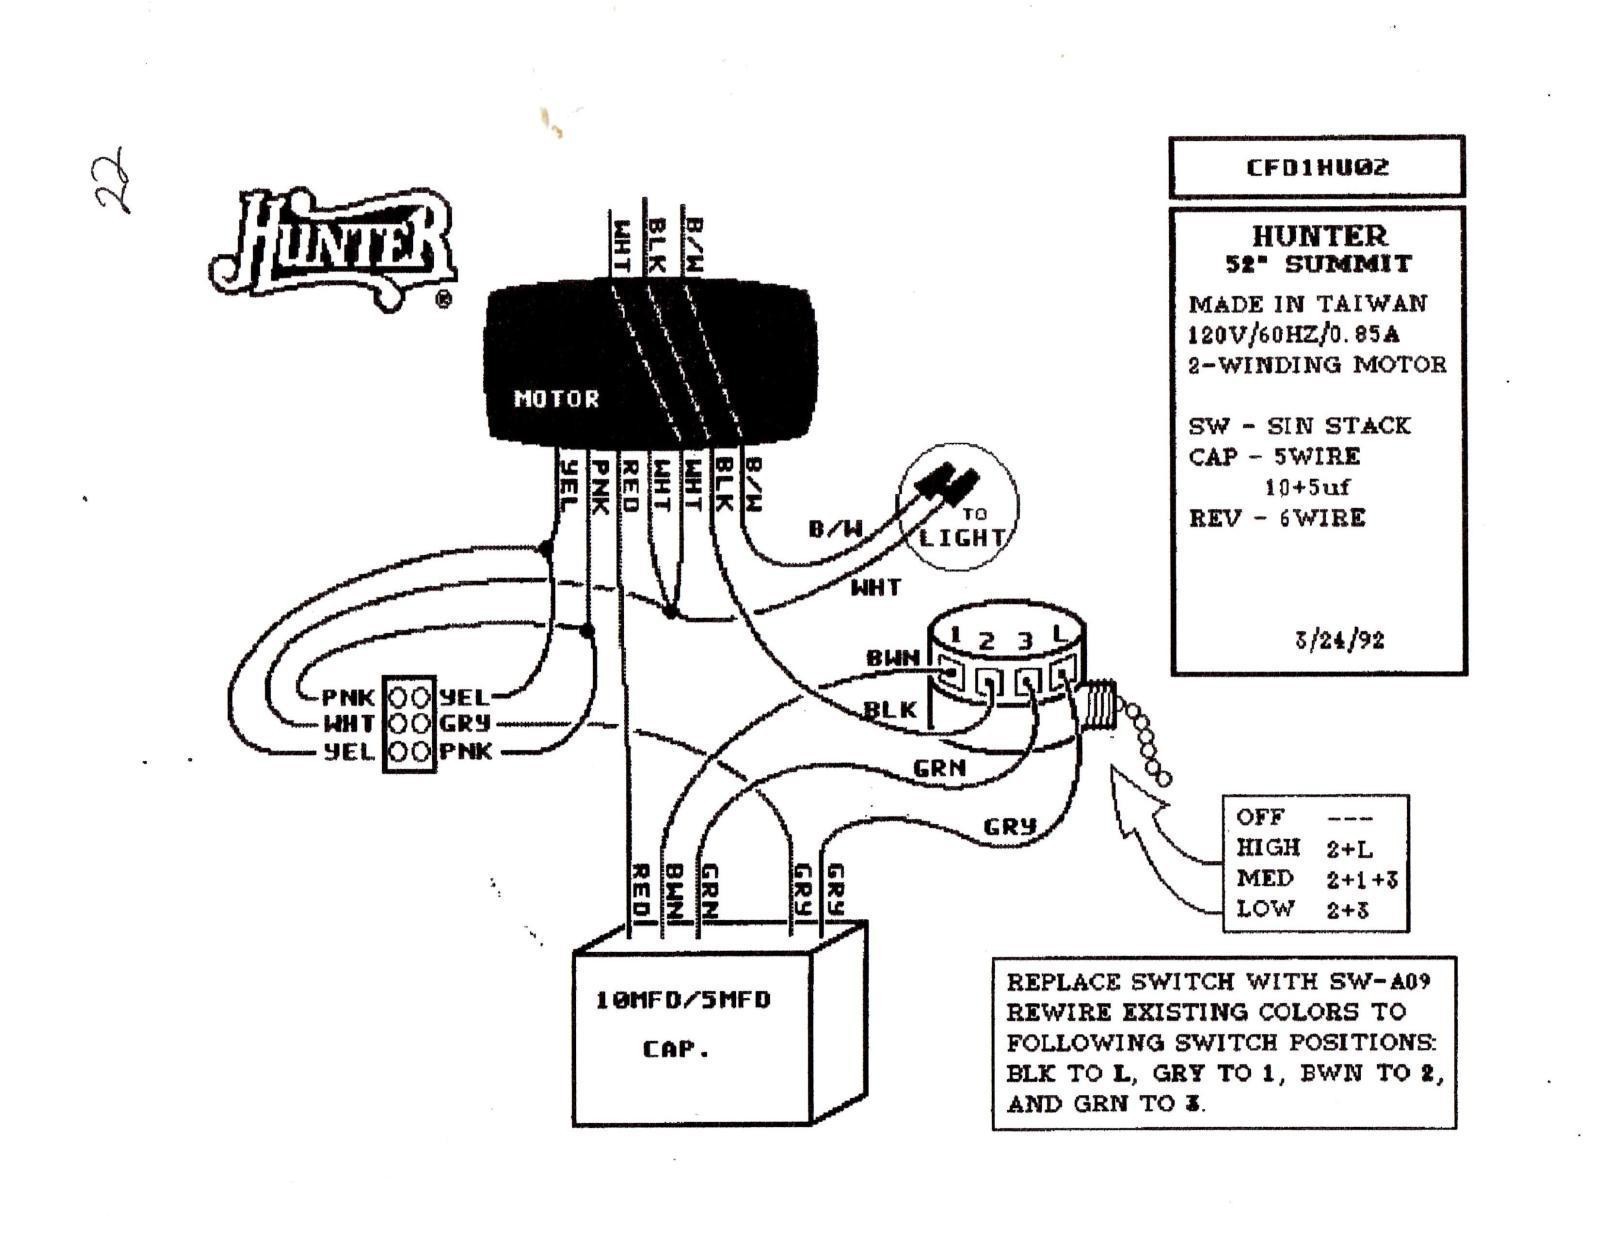 Exhaust Fan Wiring Diagram With Capacitor Best Extractor Fan Capacitor Wiring Diagram Best 4 Wire Fan Diagram